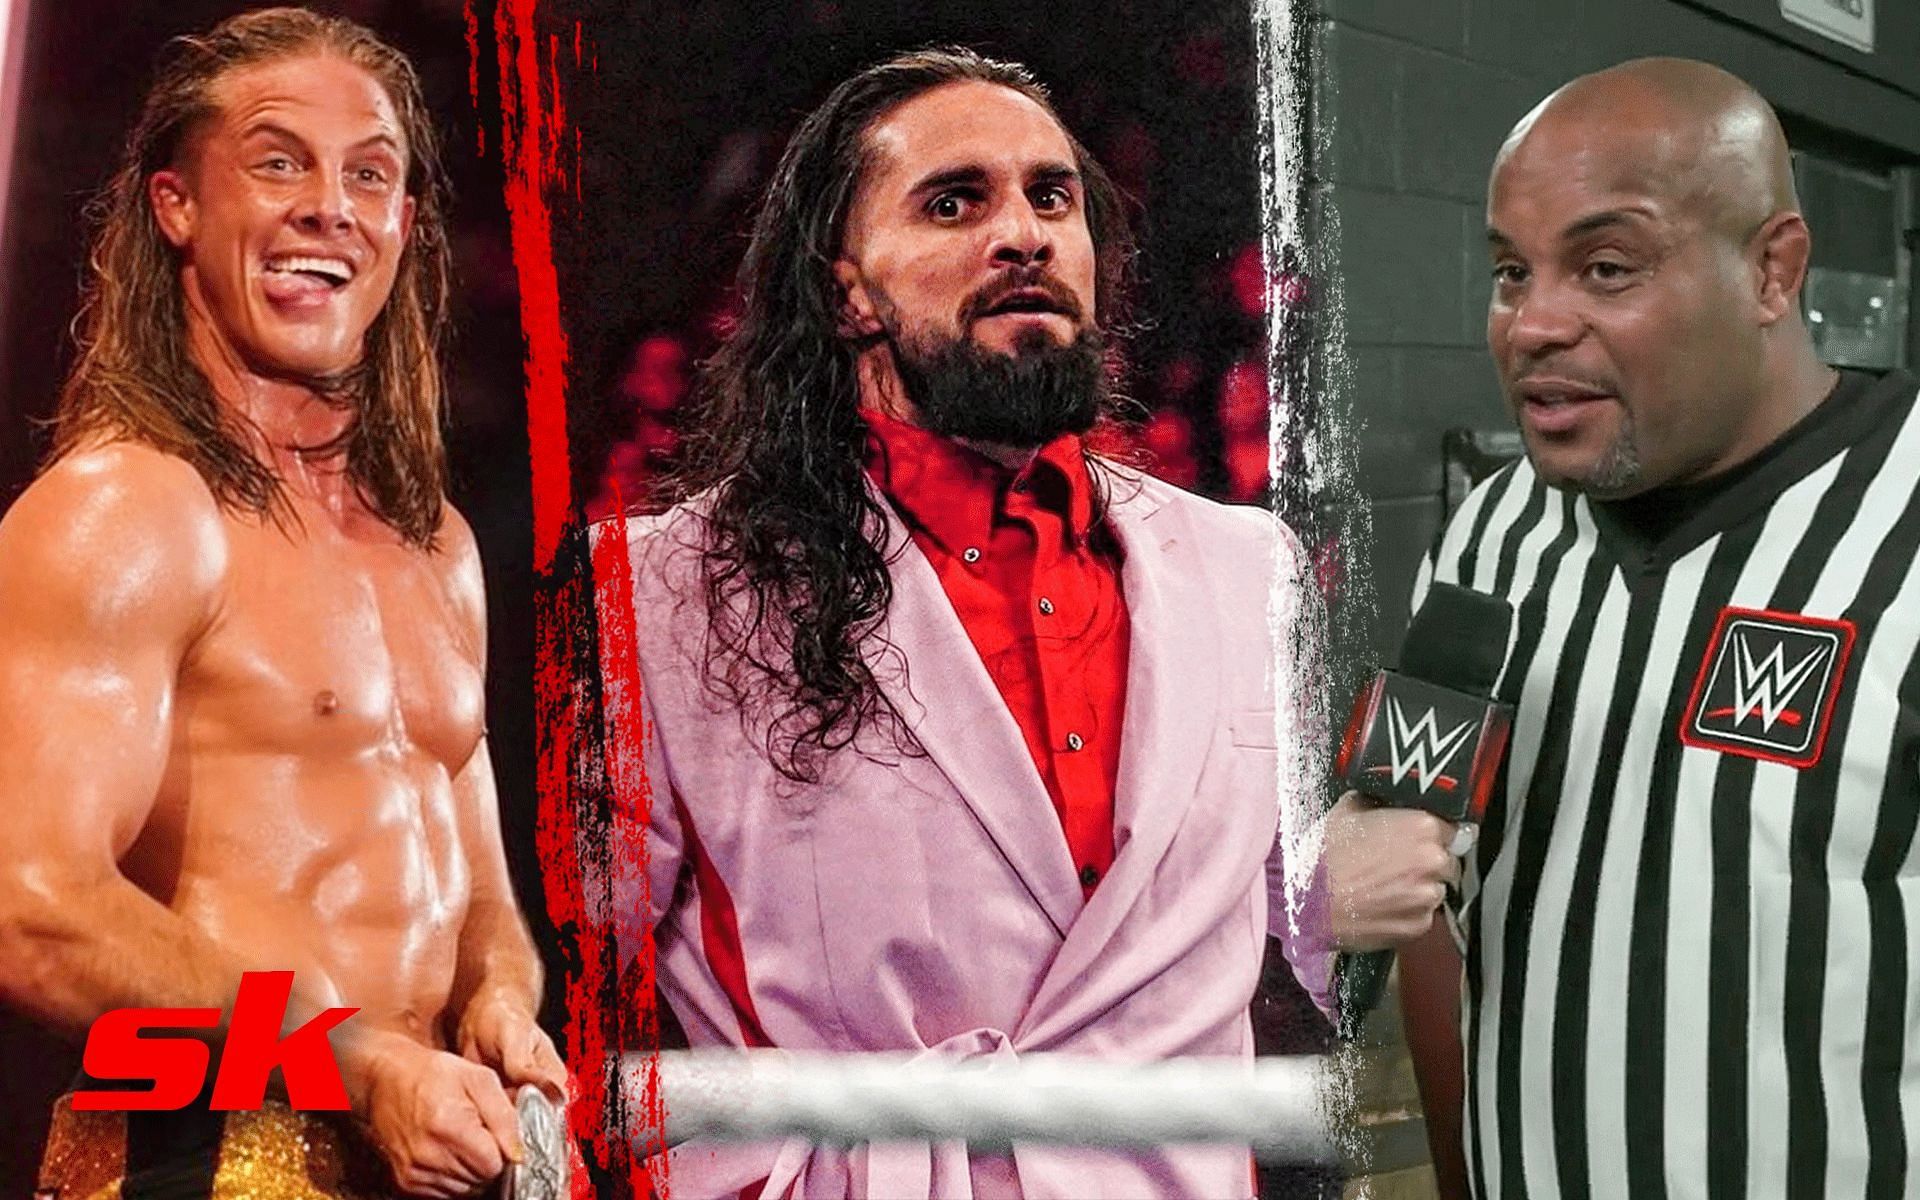 Matt Riddle (left), Seth Rollins (middle) and Daniel Cormier (right) [Image credits: wwe.com, @wwerollins and @riddlebro on Instagram]